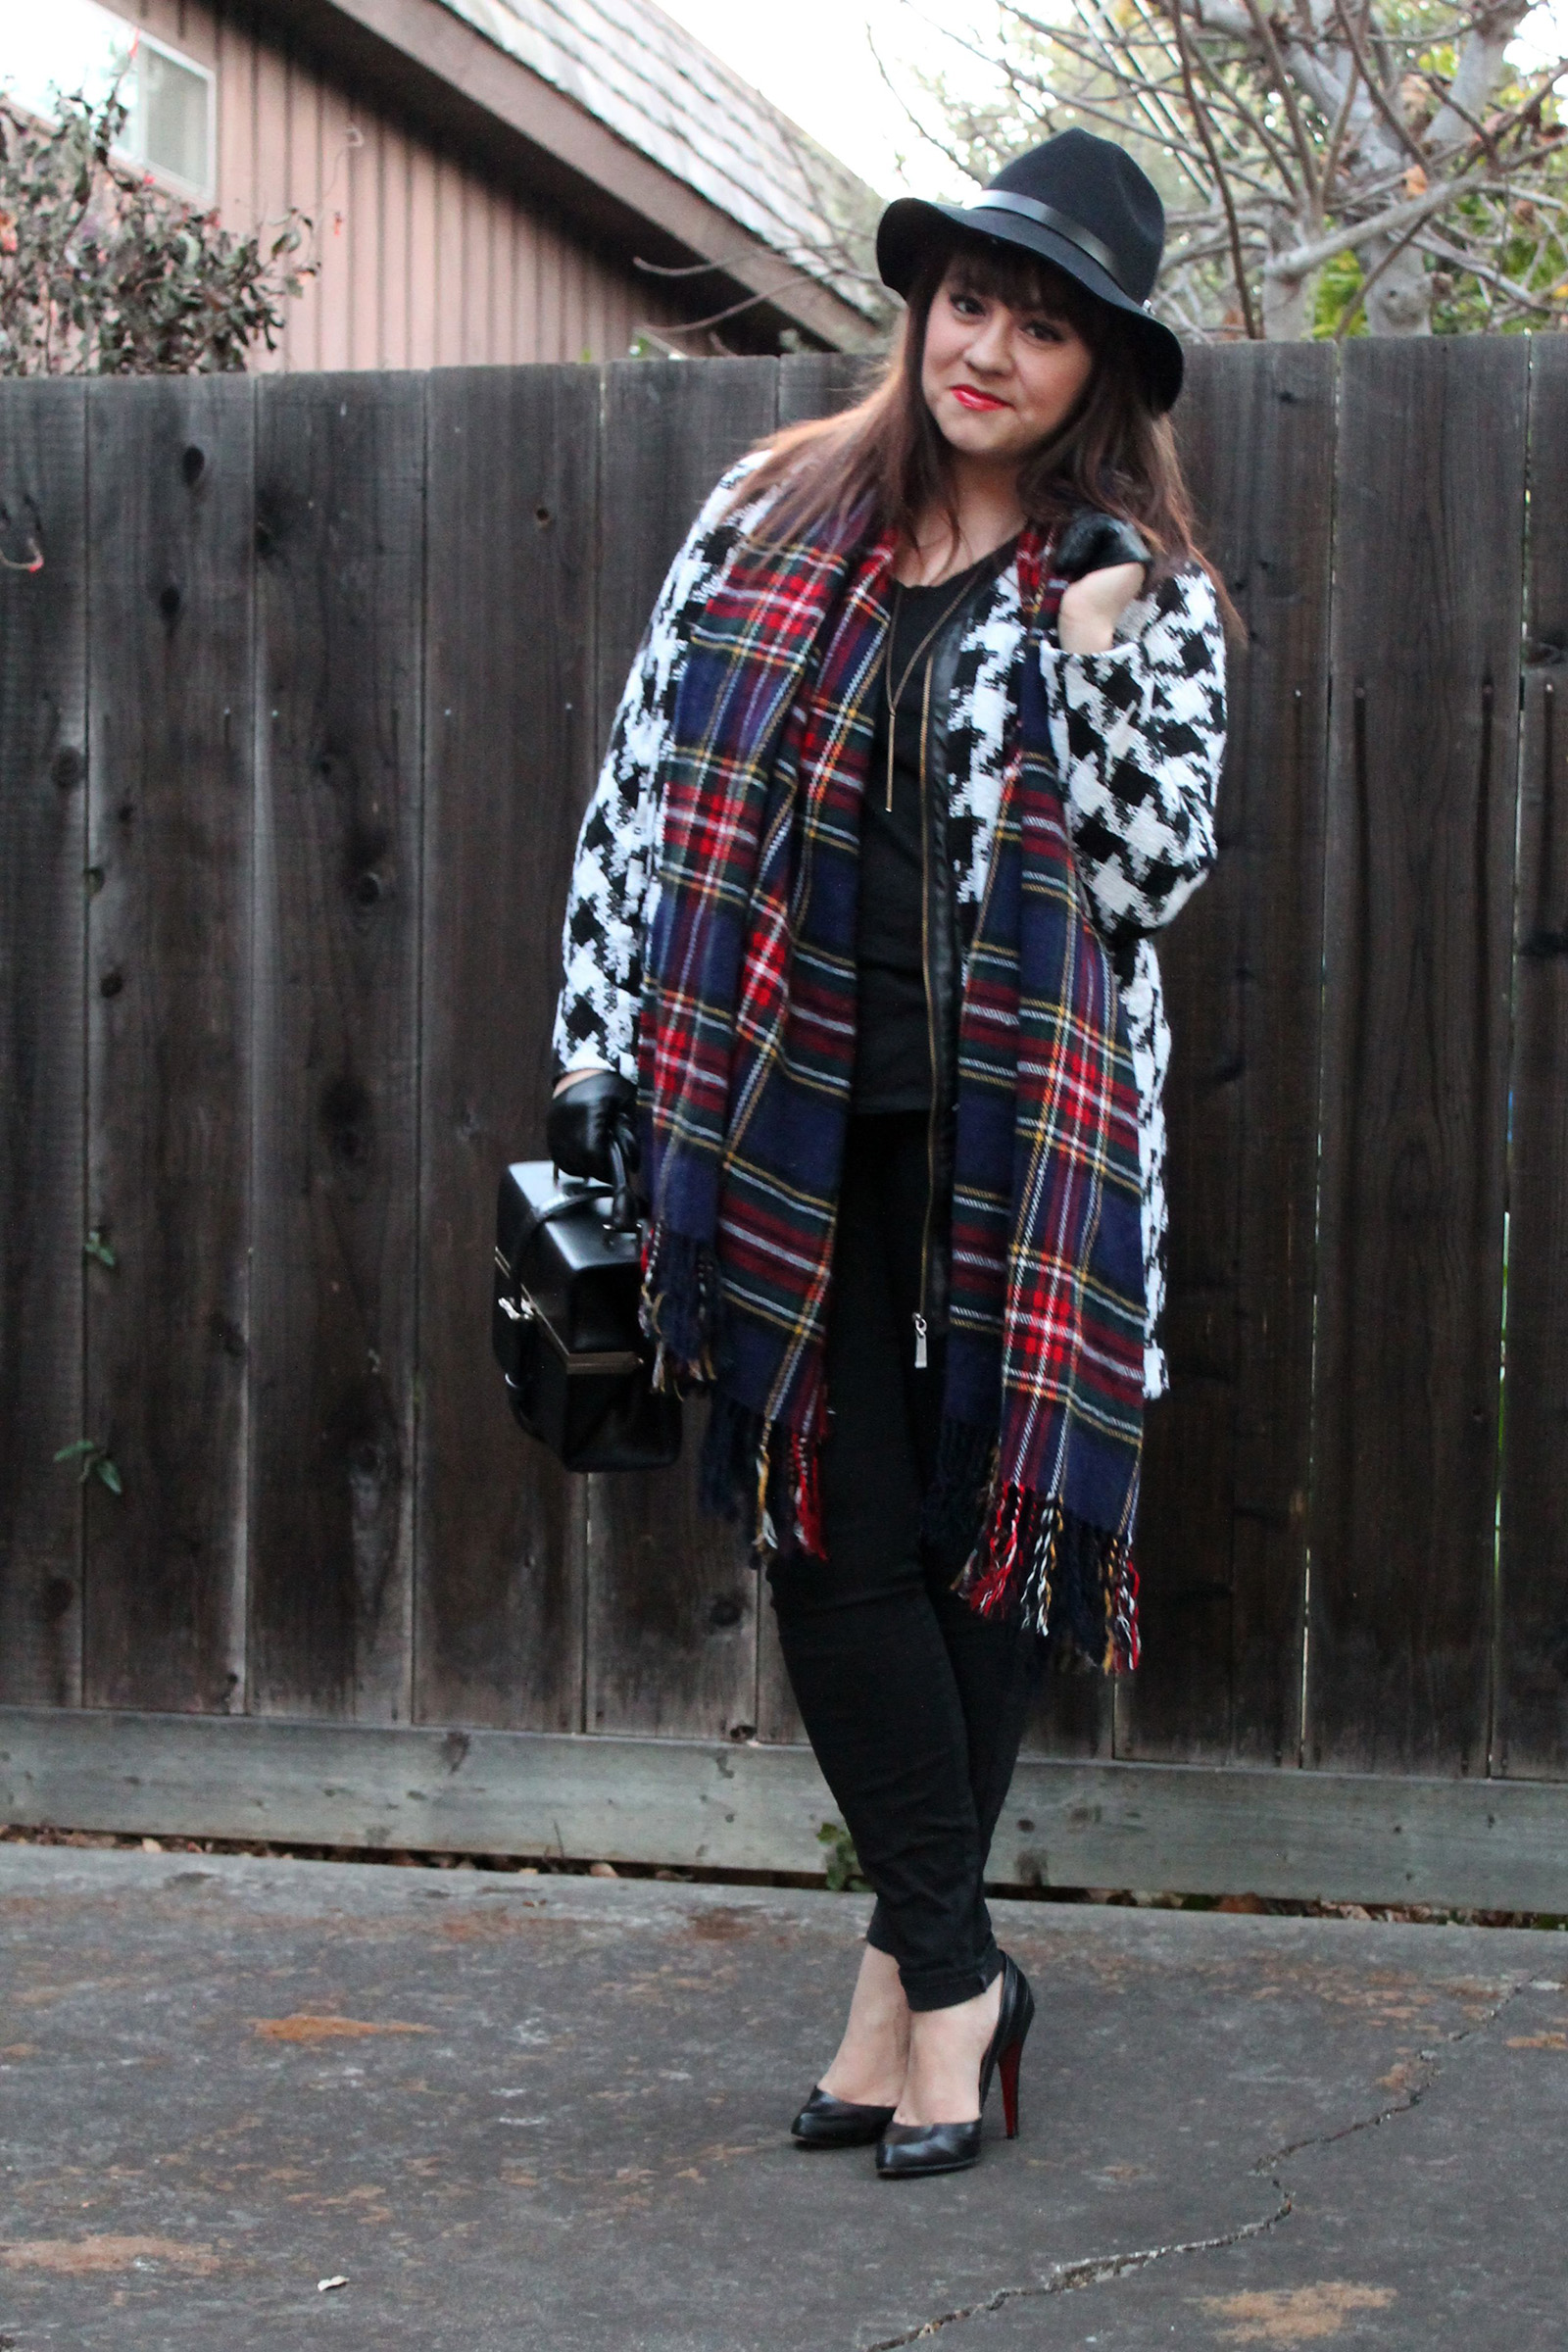 It's because I think too much: Houndstooth + Plaid